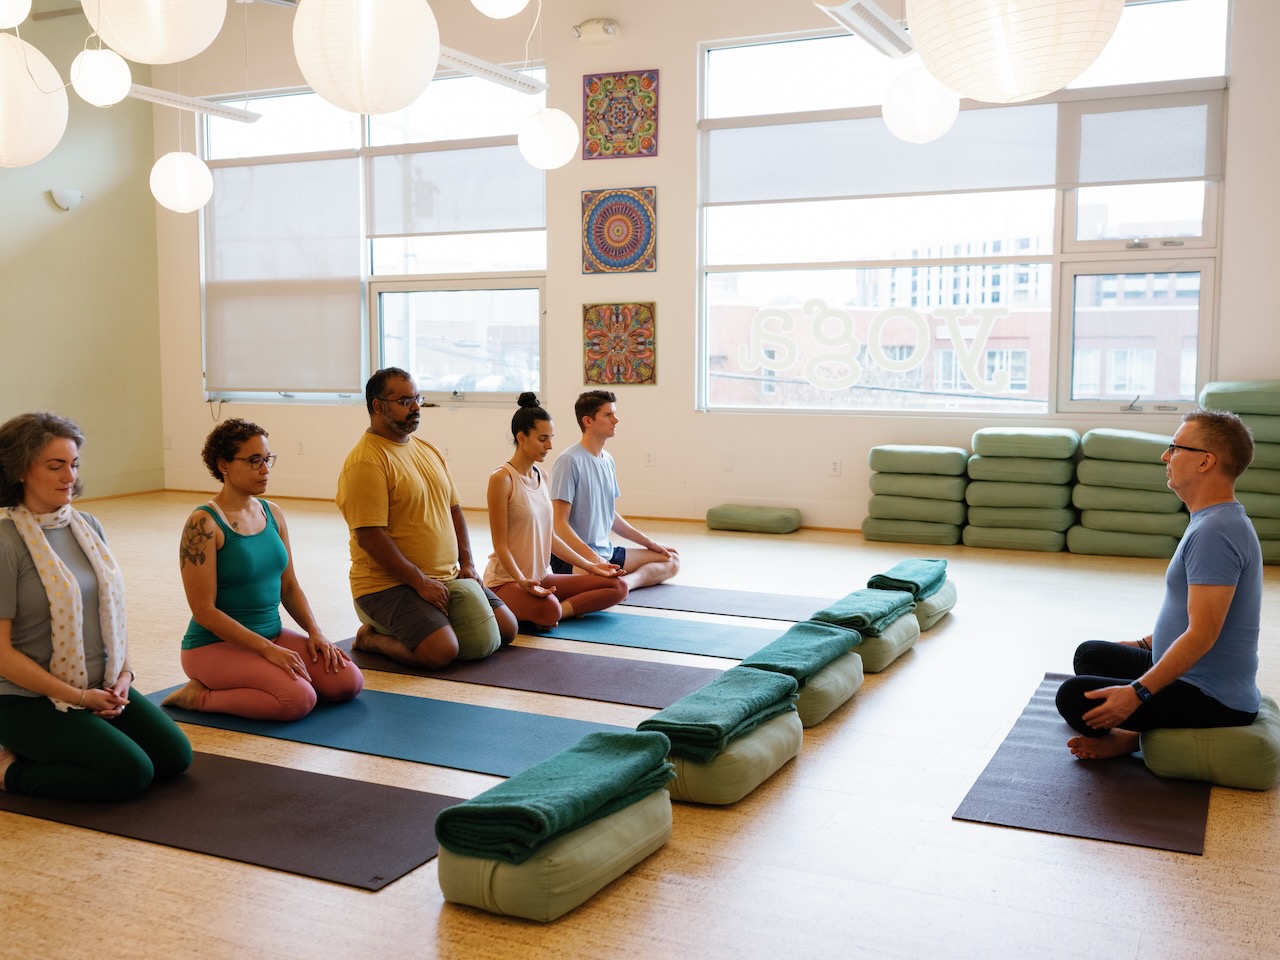 Students sit in centering in a sunny yoga studio